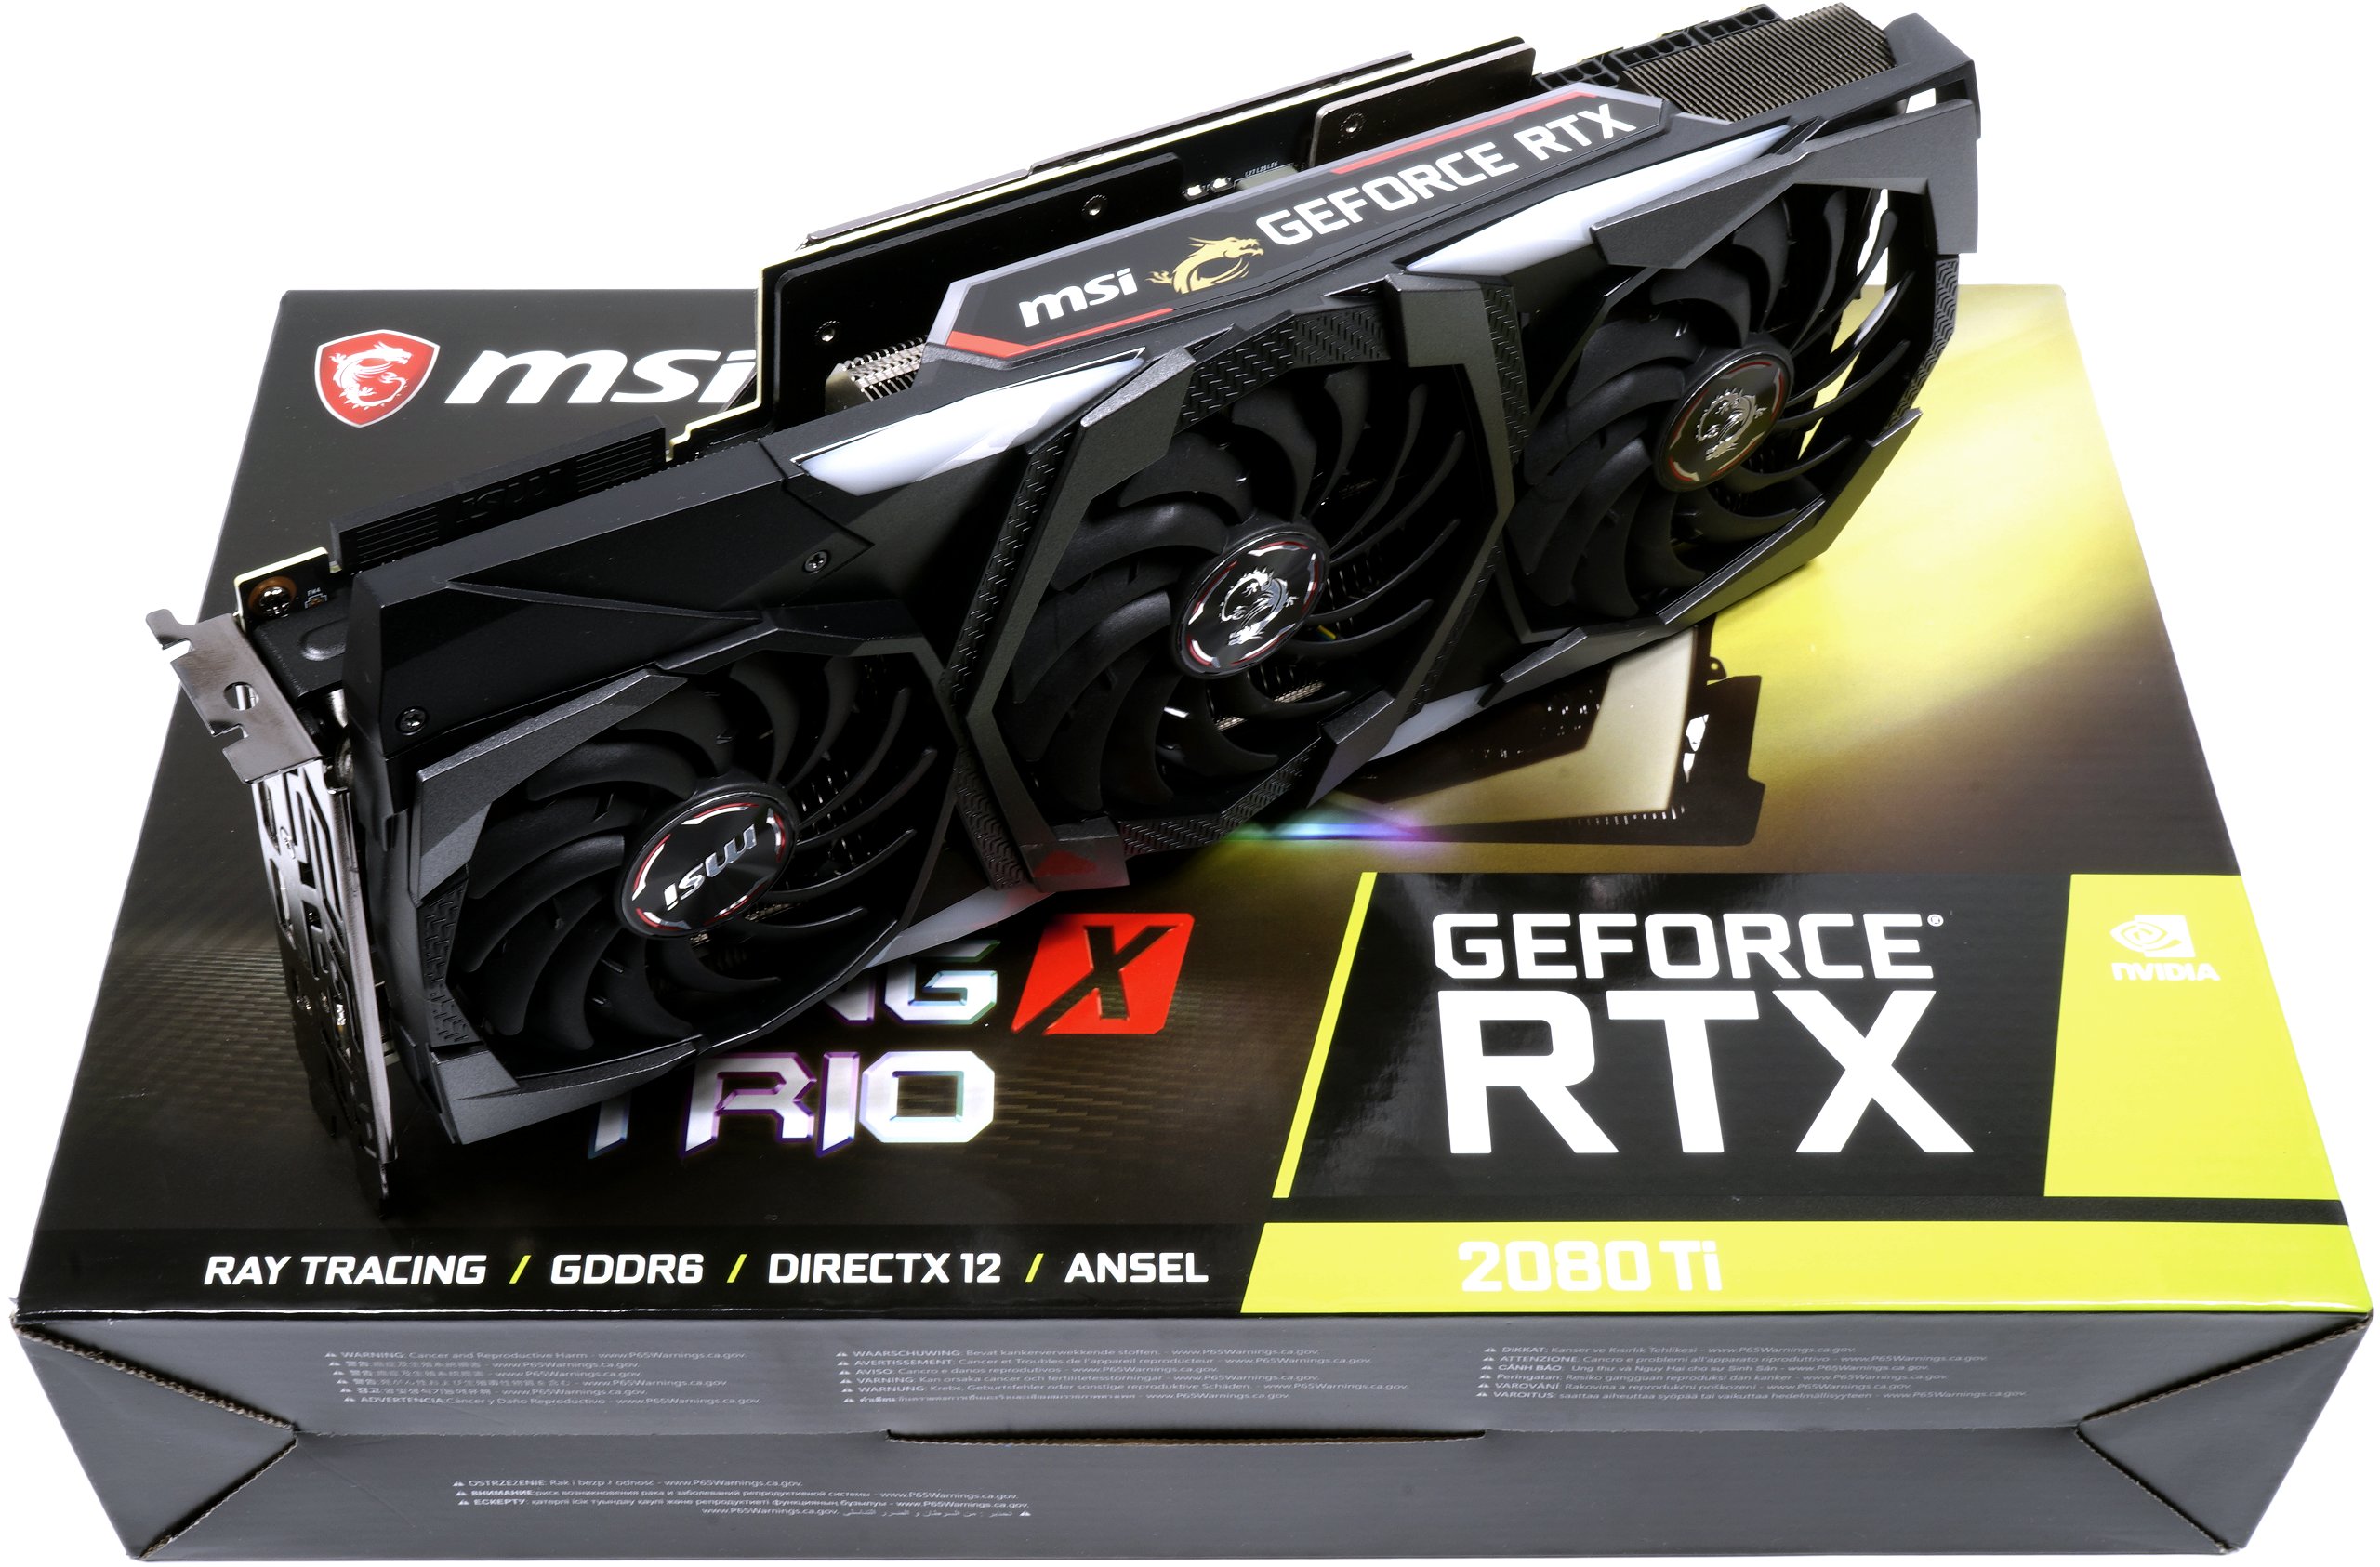 MSI GeForce RTX 2080 Ti Gaming X Trio in review - thick jaws, cool ...